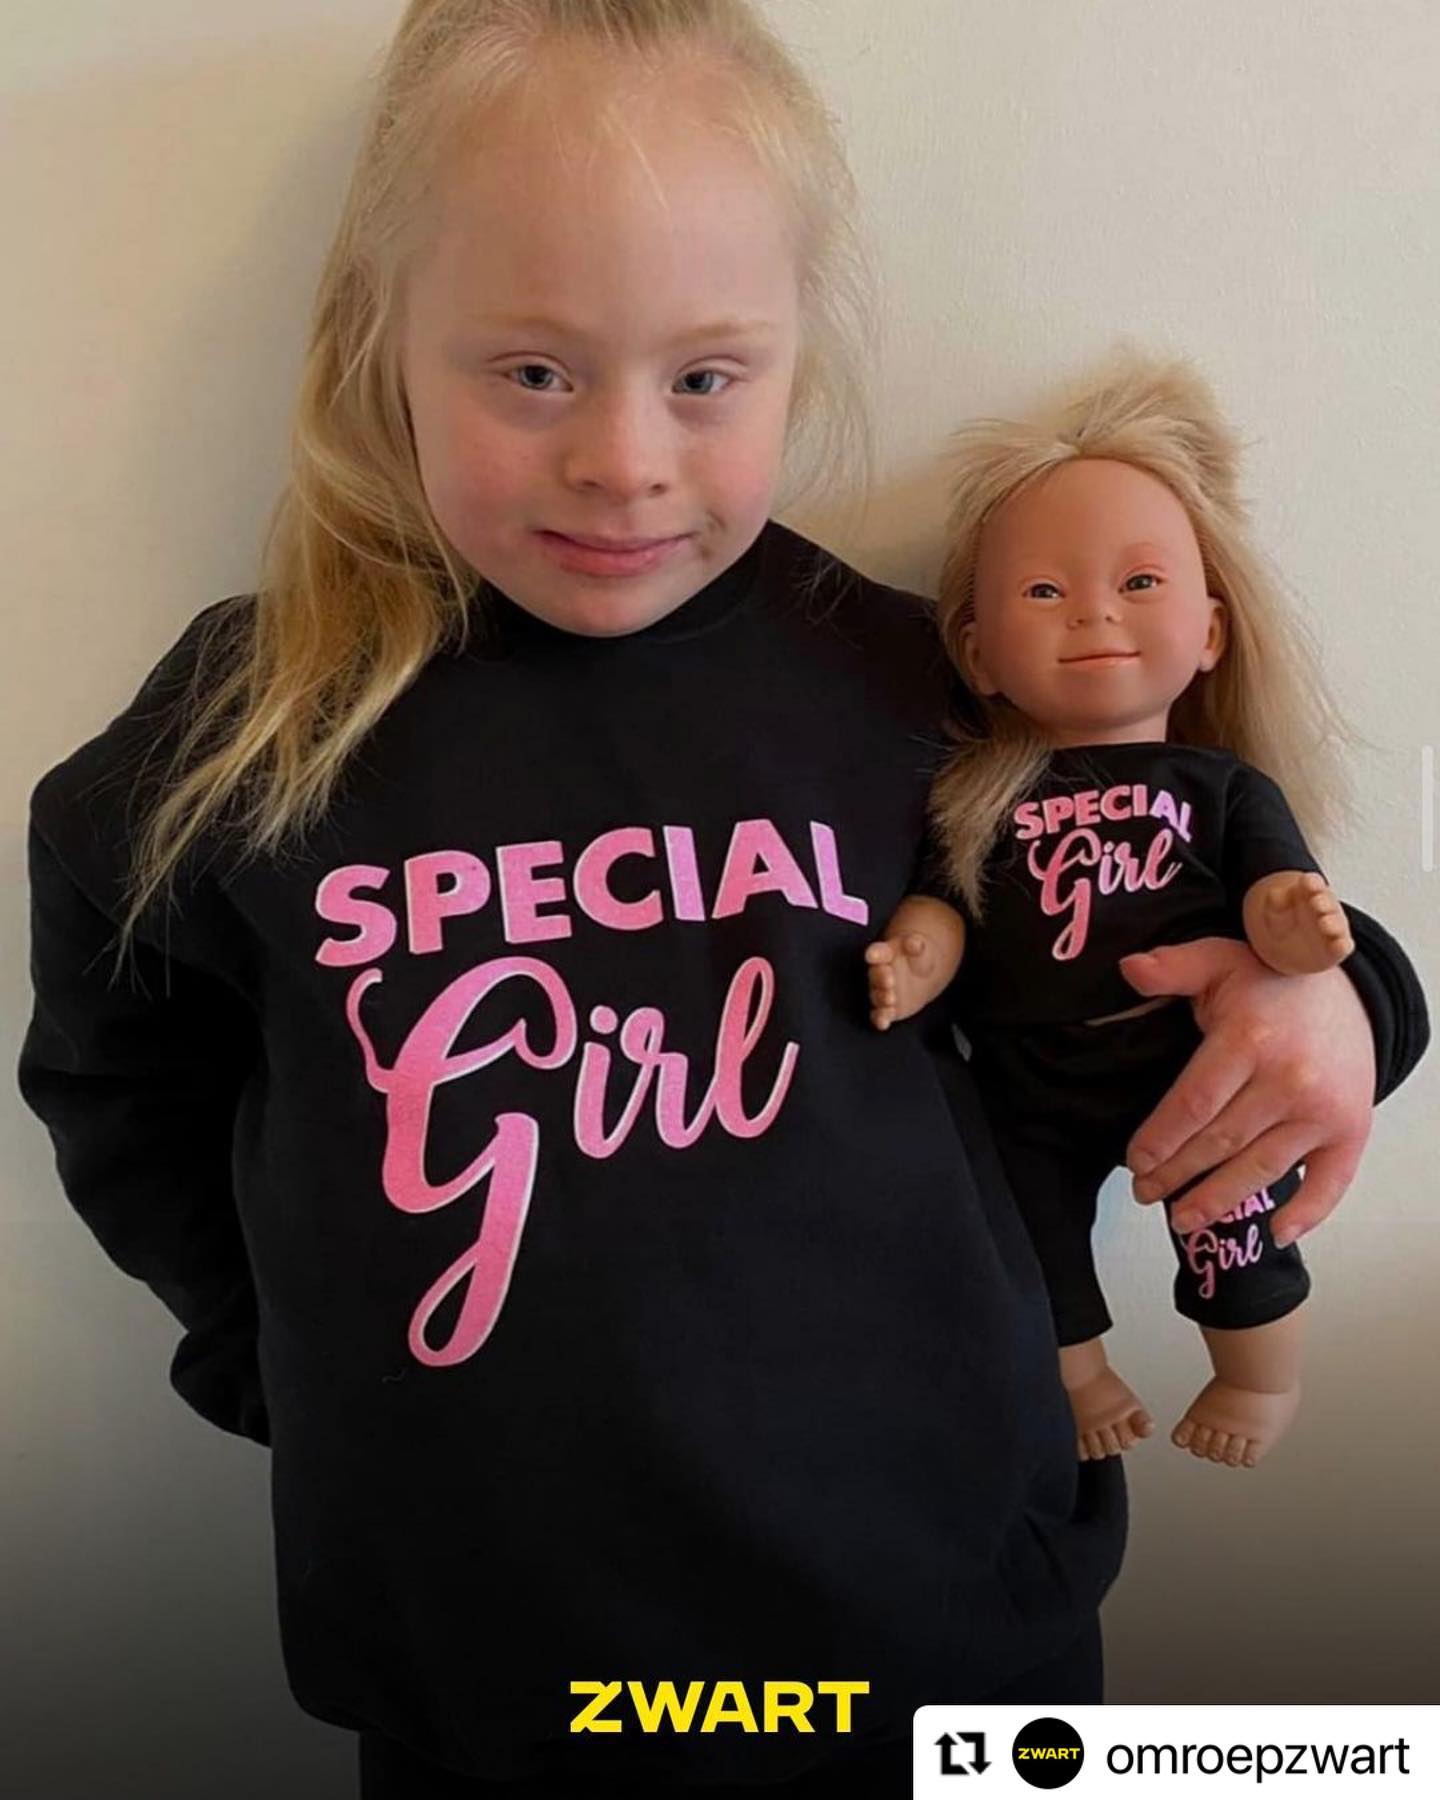 Romy is one of the children who modelled for the new dolls inspired by children with Down syndrome.